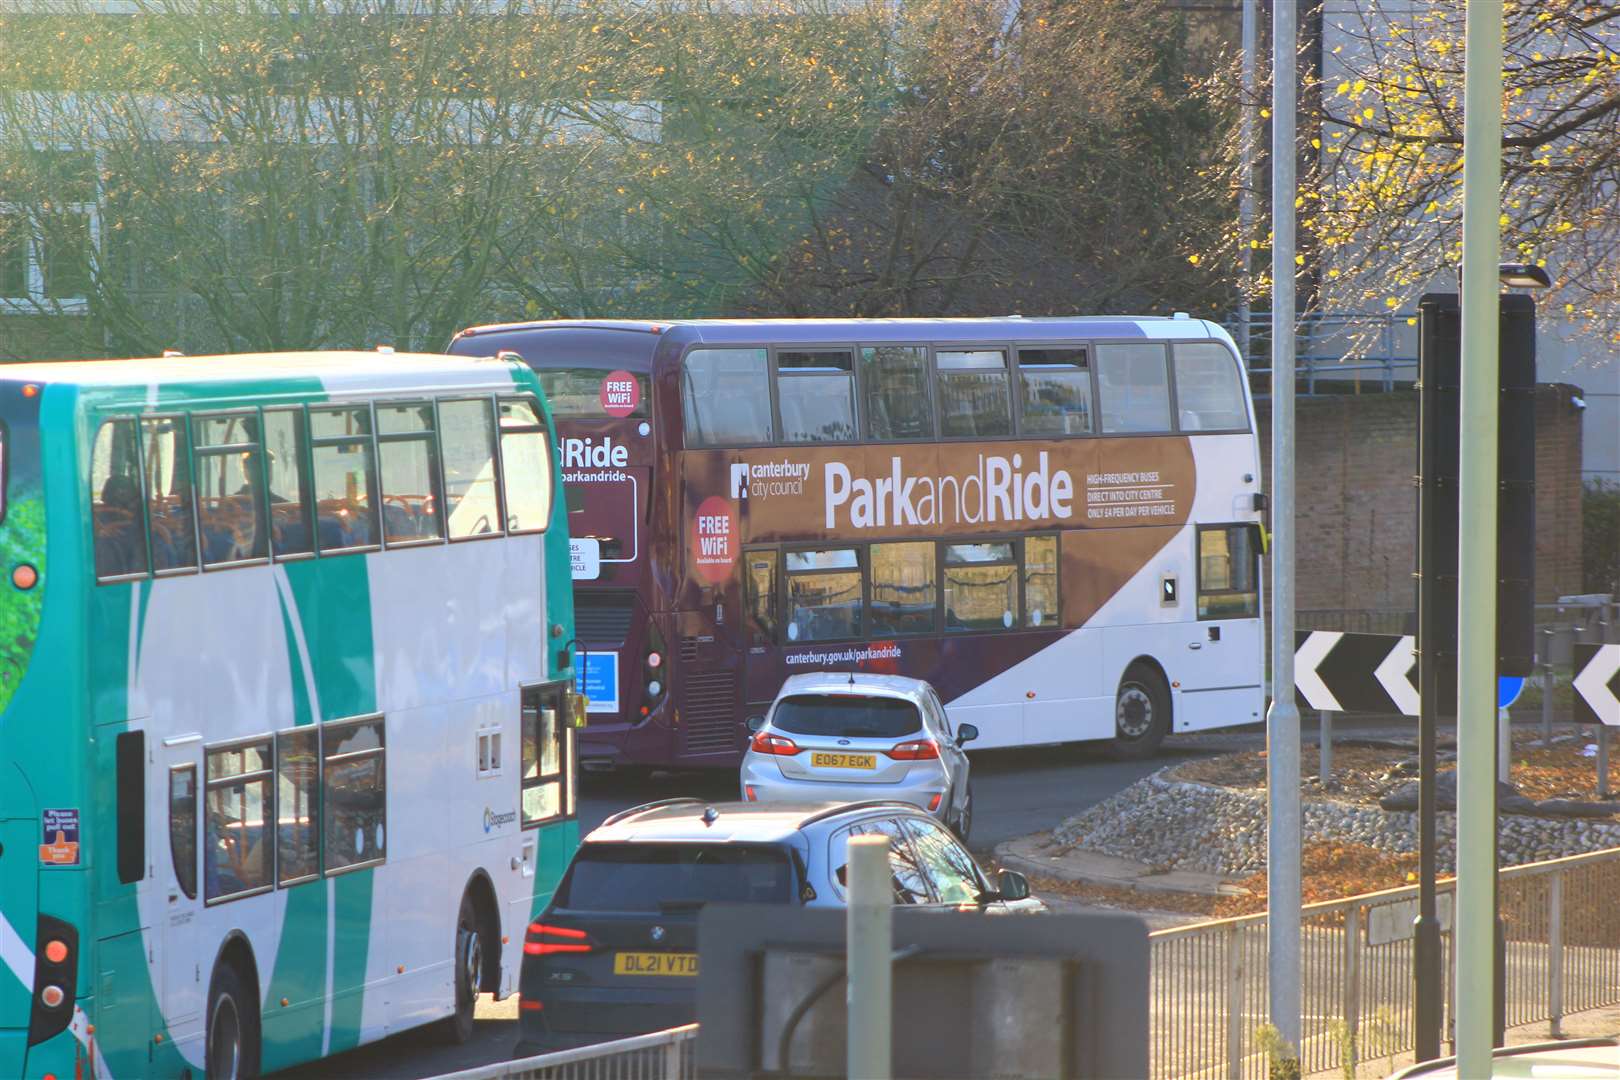 Park and ride services in Canterbury will be free of charge on Saturday